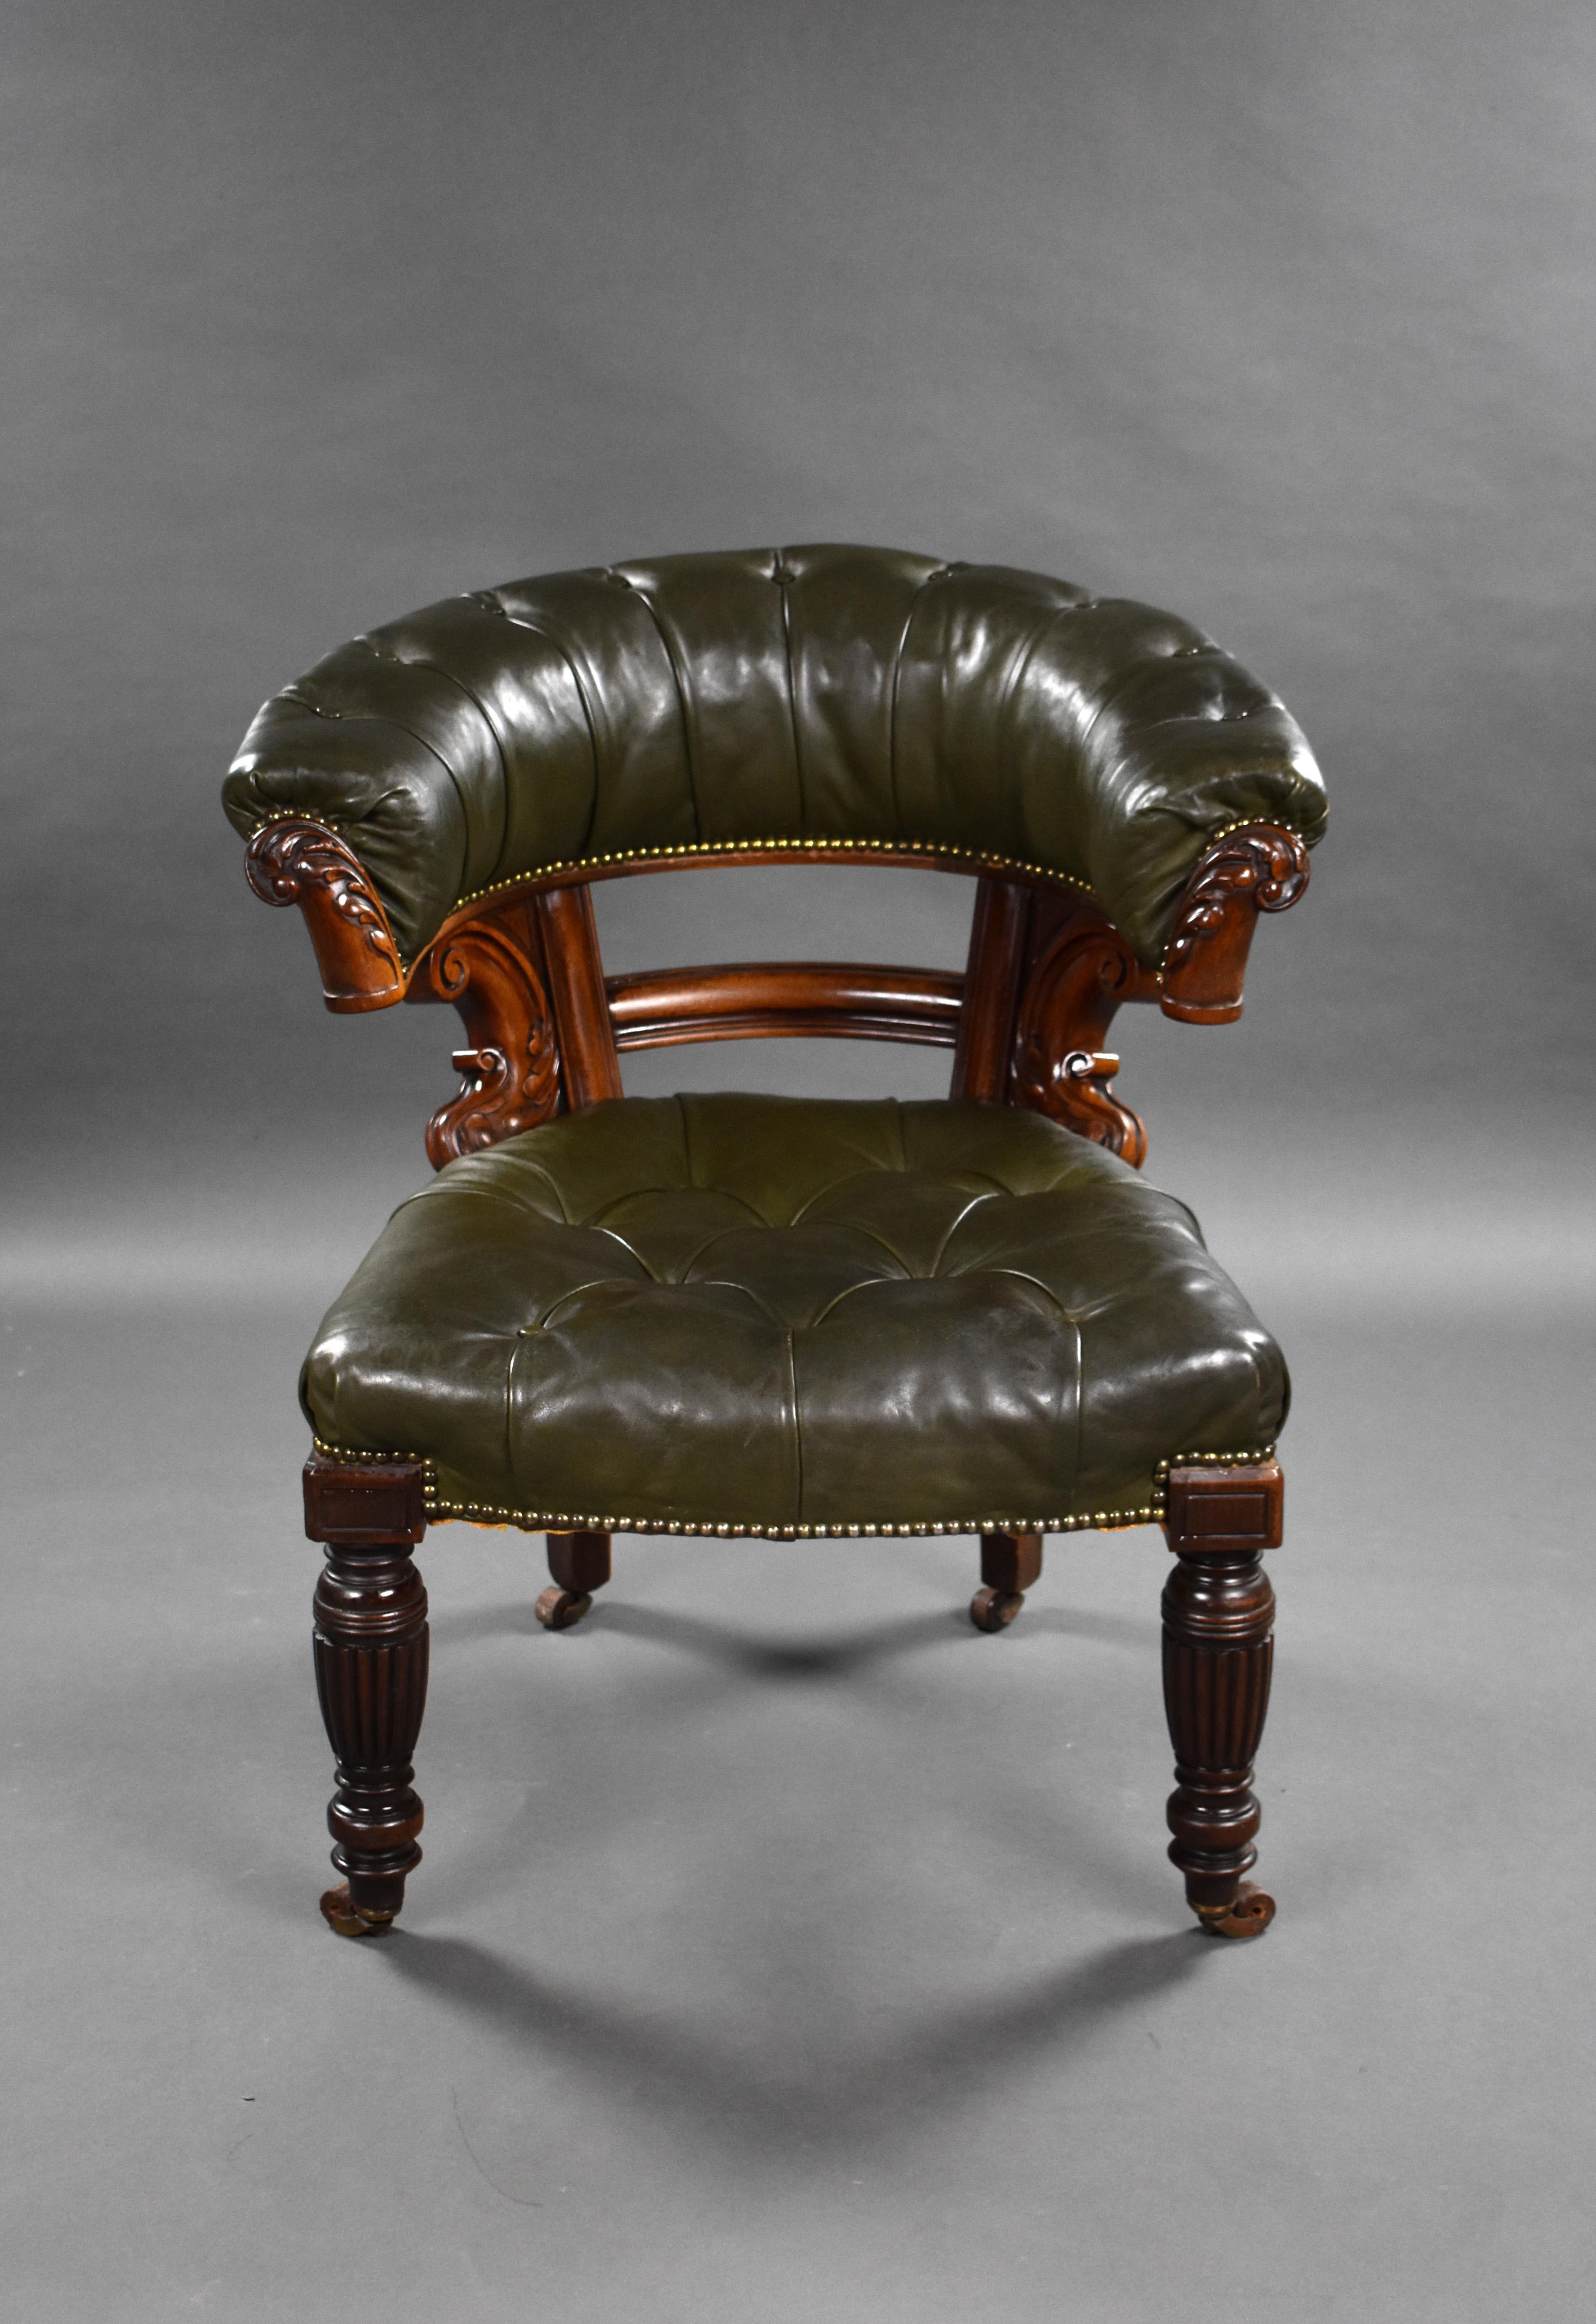 For sale is a good quality Victorian leather chair, in the manner of Gillows, having a horseshoe back on carved supports and reeded turned legs terminating on castors. The chairs remains in good condition, showing minor signs of wear commensurate